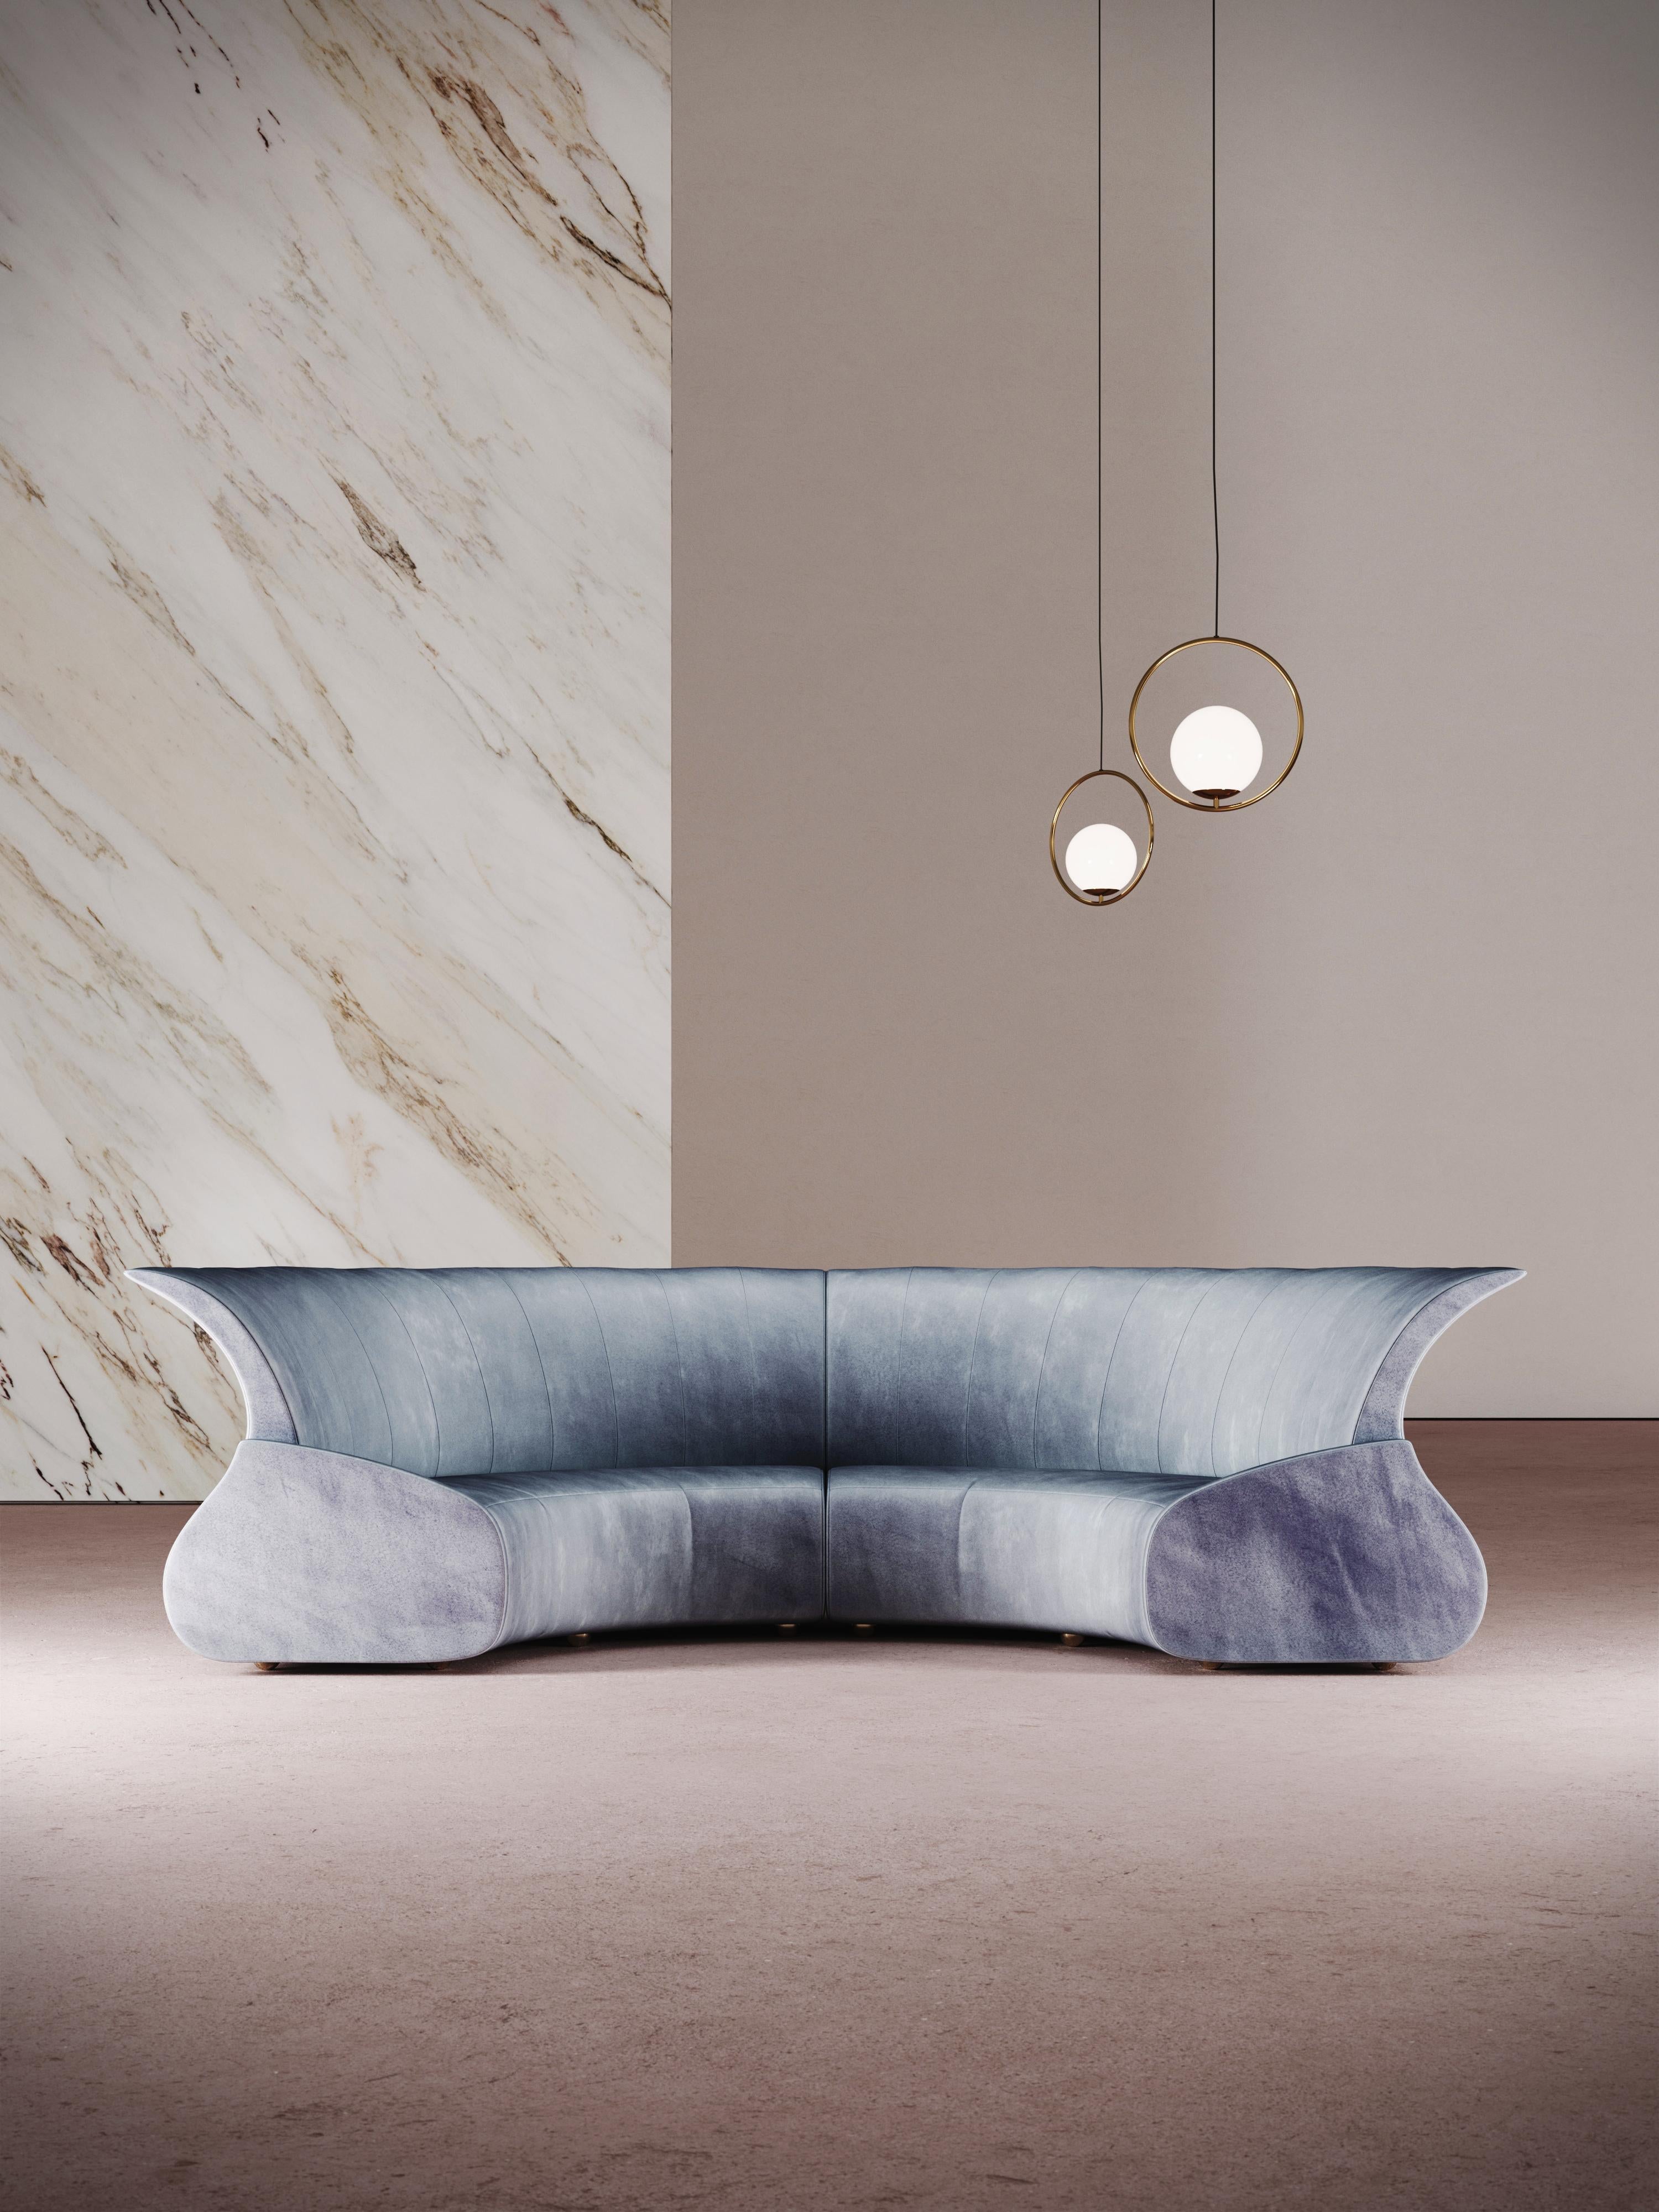 European Sculptural Made to Order Modernist Eclipse round sofa For Sale